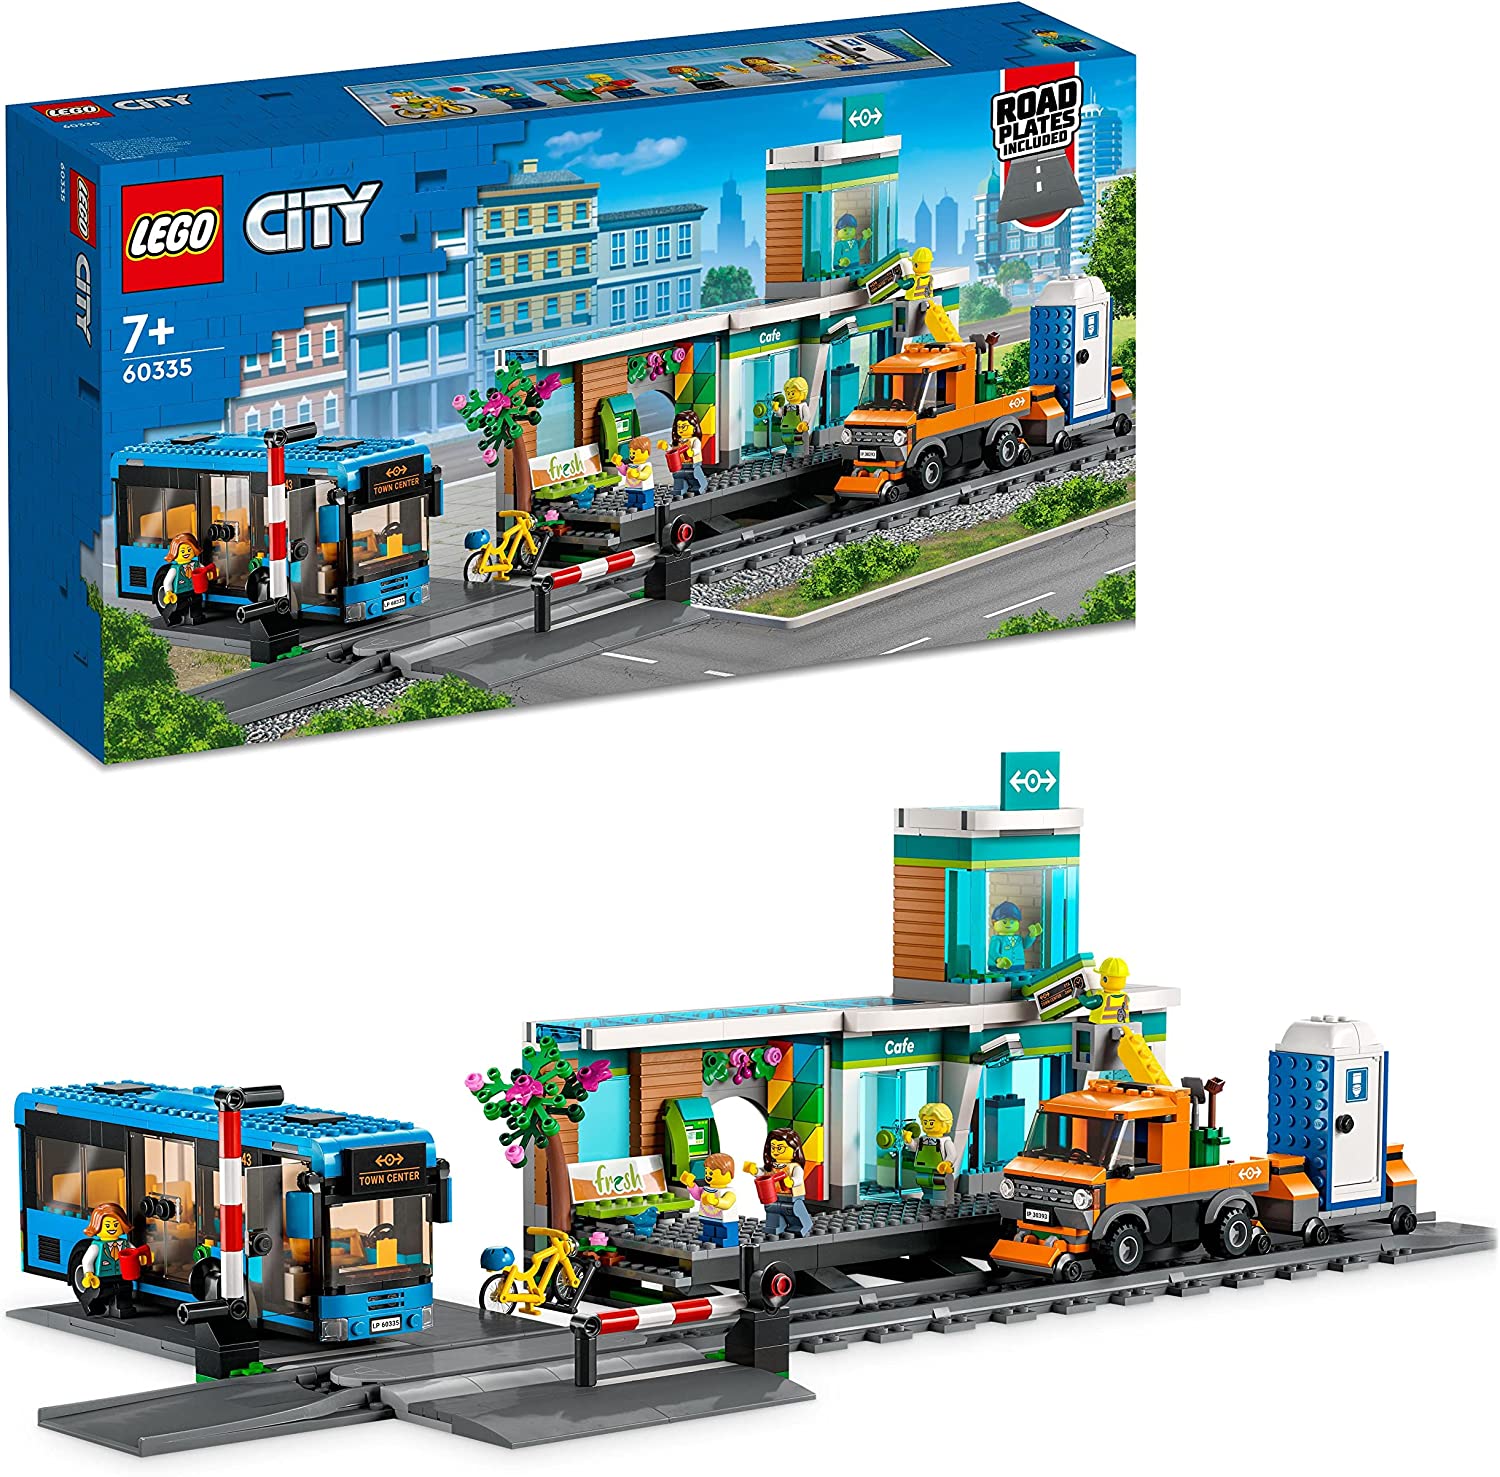 LEGO 60335 City Train Station, Toy Set with Rail Truck, Street Plate, Rail Segments and Mini Figures, Compatible with City Train Sets and More